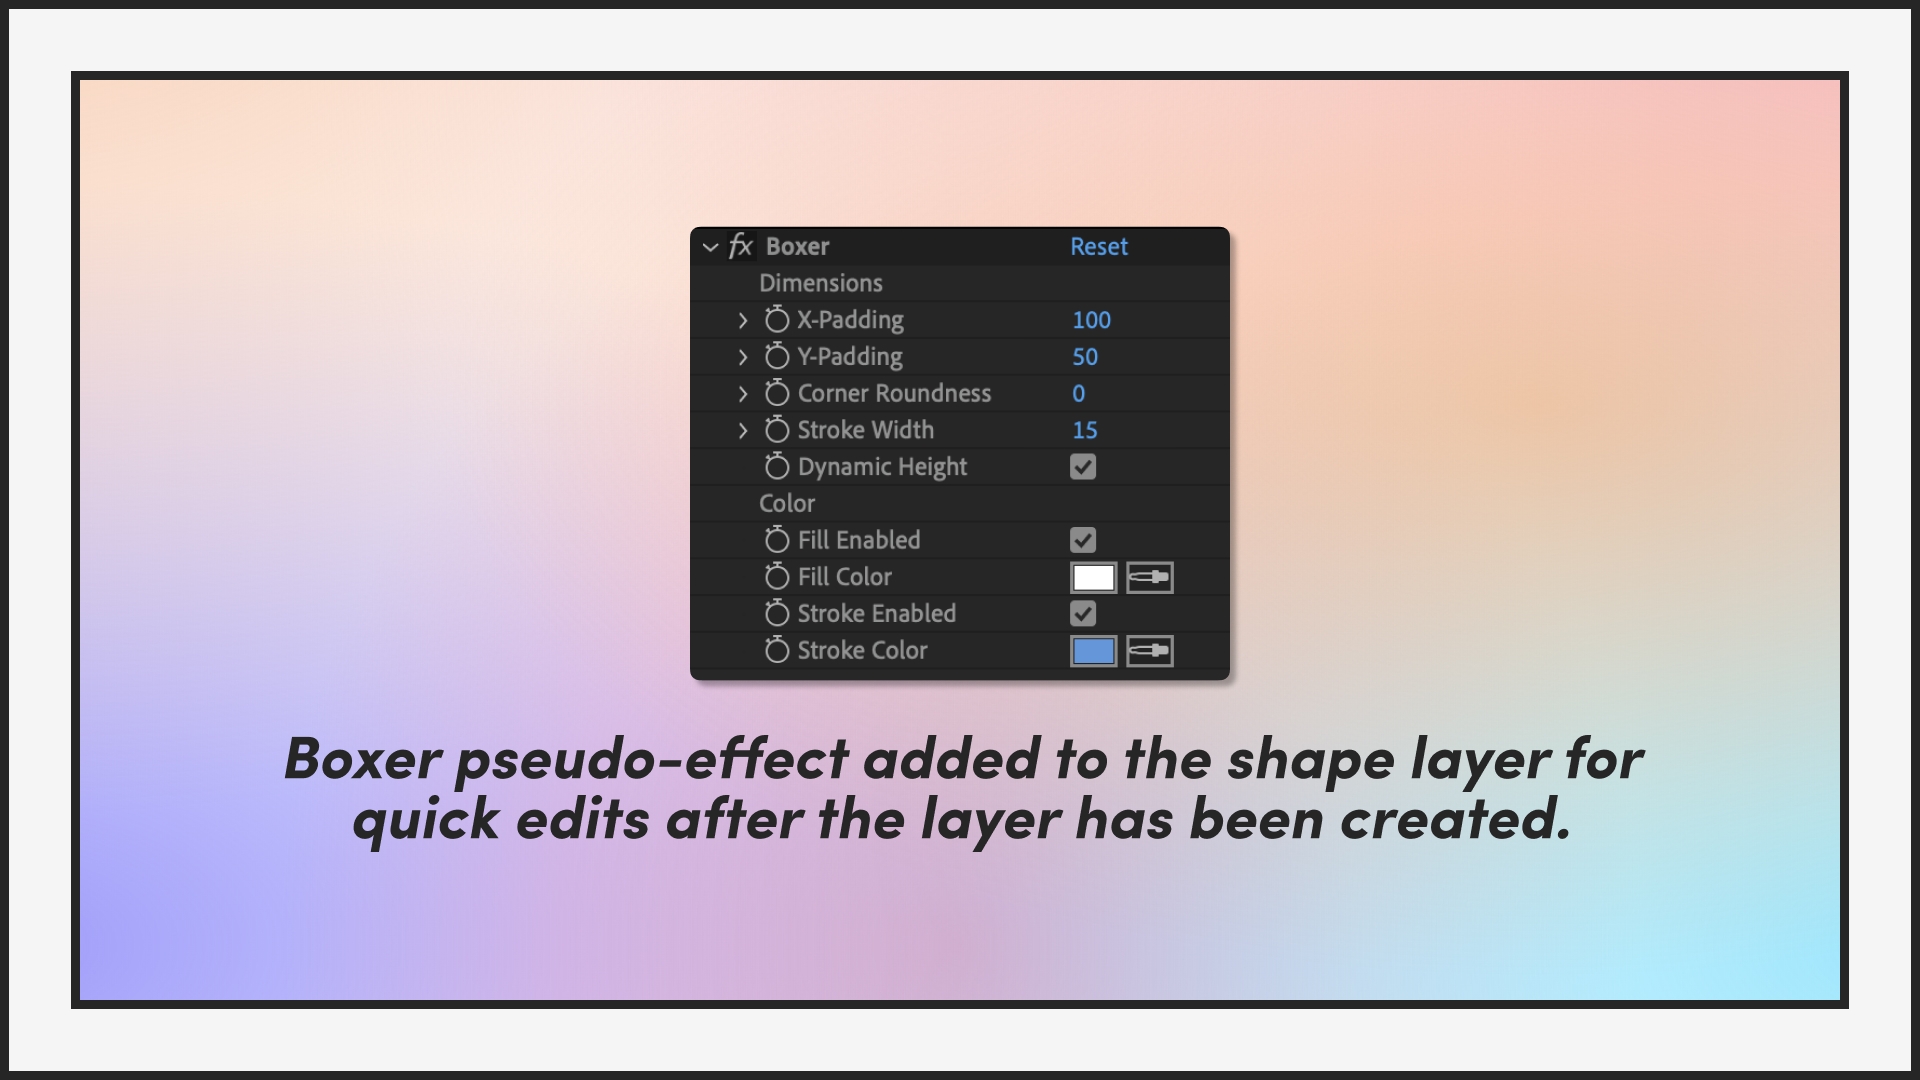 Boxer pseudo effect added to shape layer